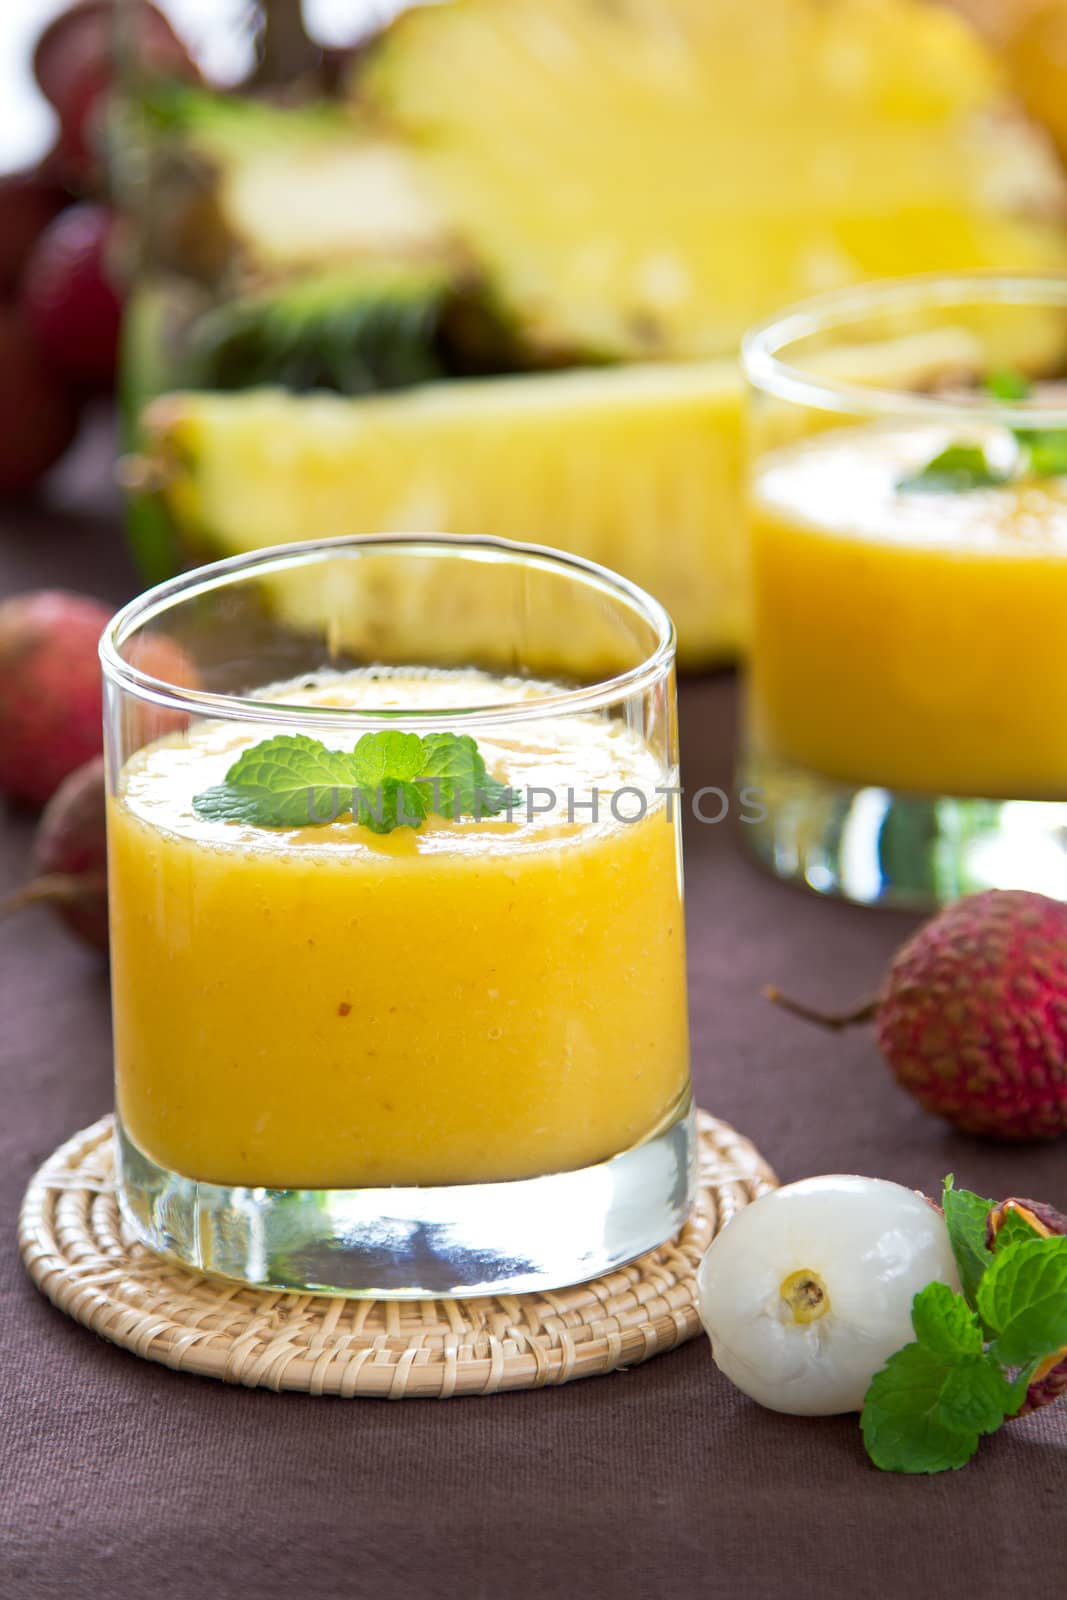 Lychee ,Mango and Pineapple smoothie with mint